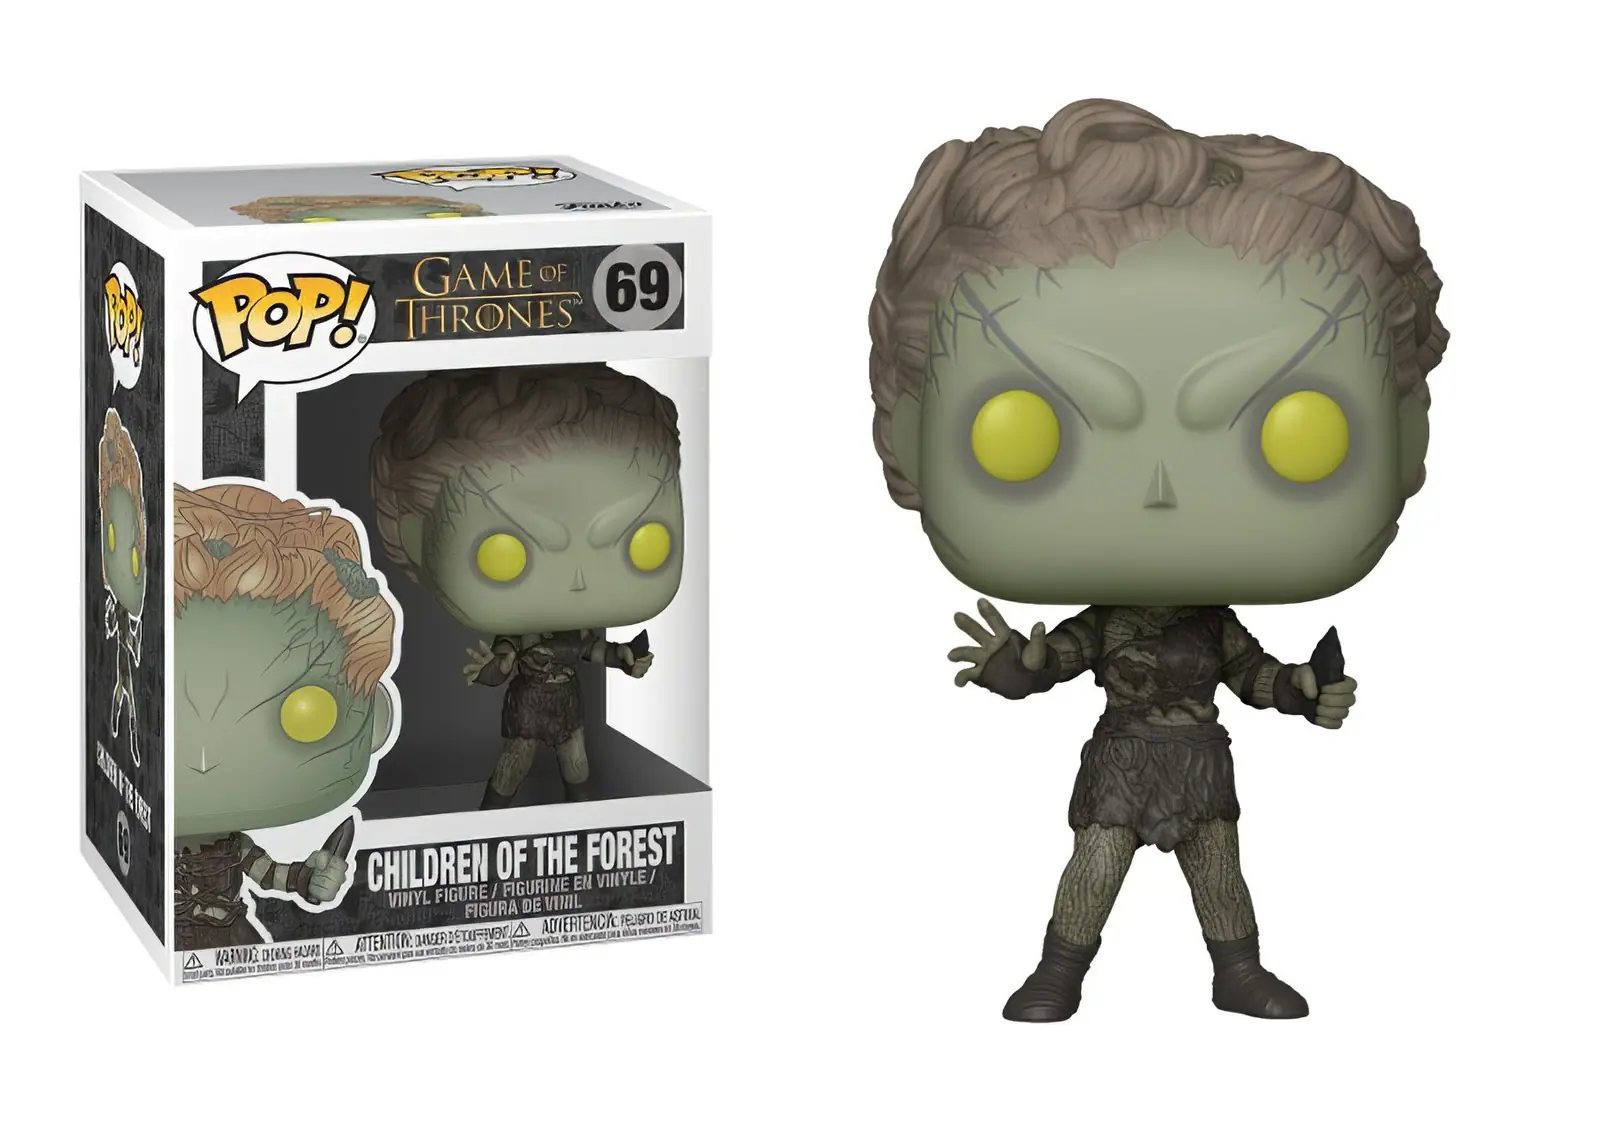 Funko Pop Game of Thrones 69 Children of the Forest